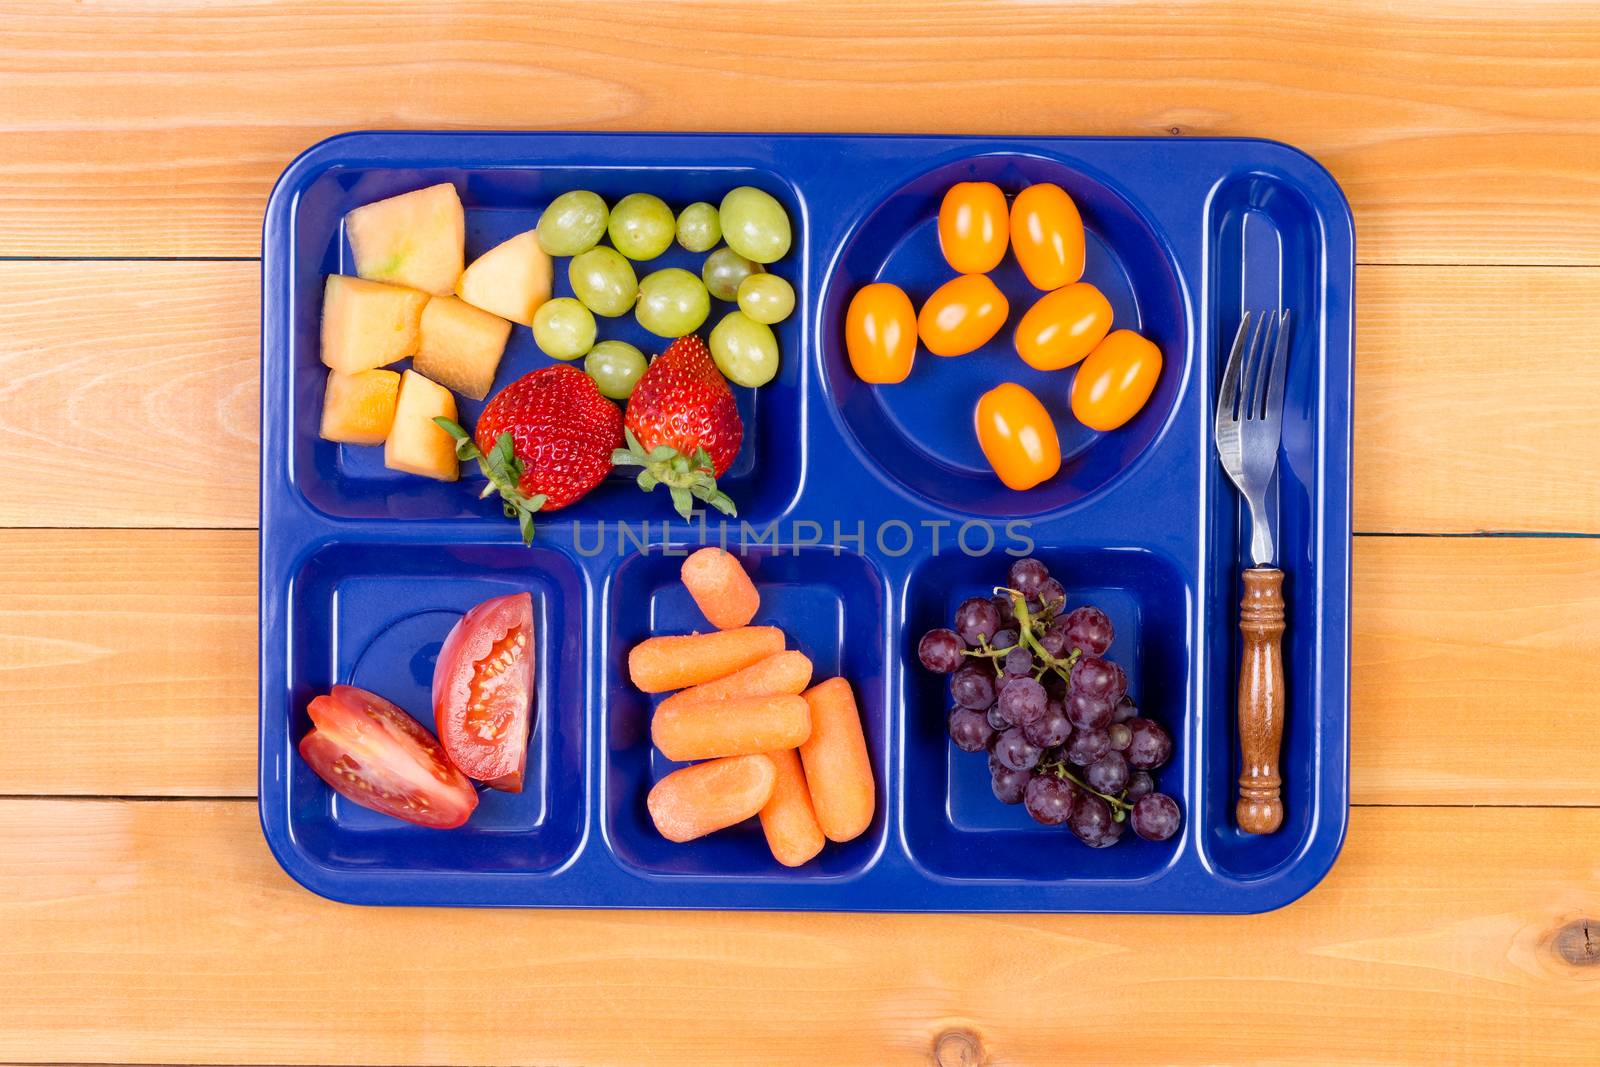 Delicious tangy and sweet fruit sampler of melon, grapes, tomatoes, carrots and grapes in lunch tray with fork